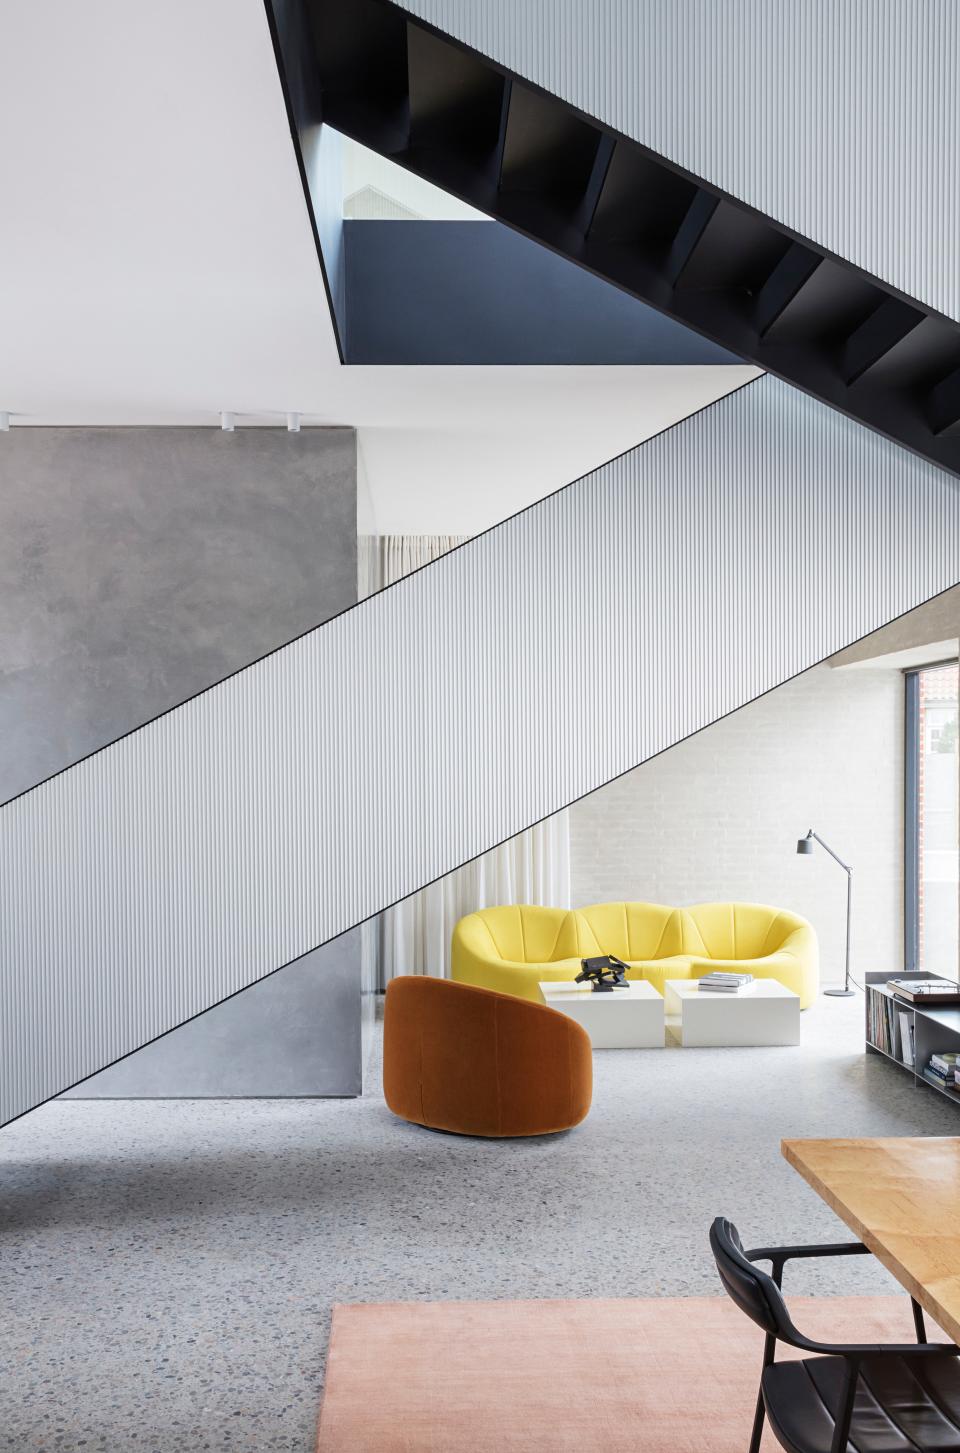 Vipp Chimney House, boutique lodgings in Copenhagen designed by Thulstrup.